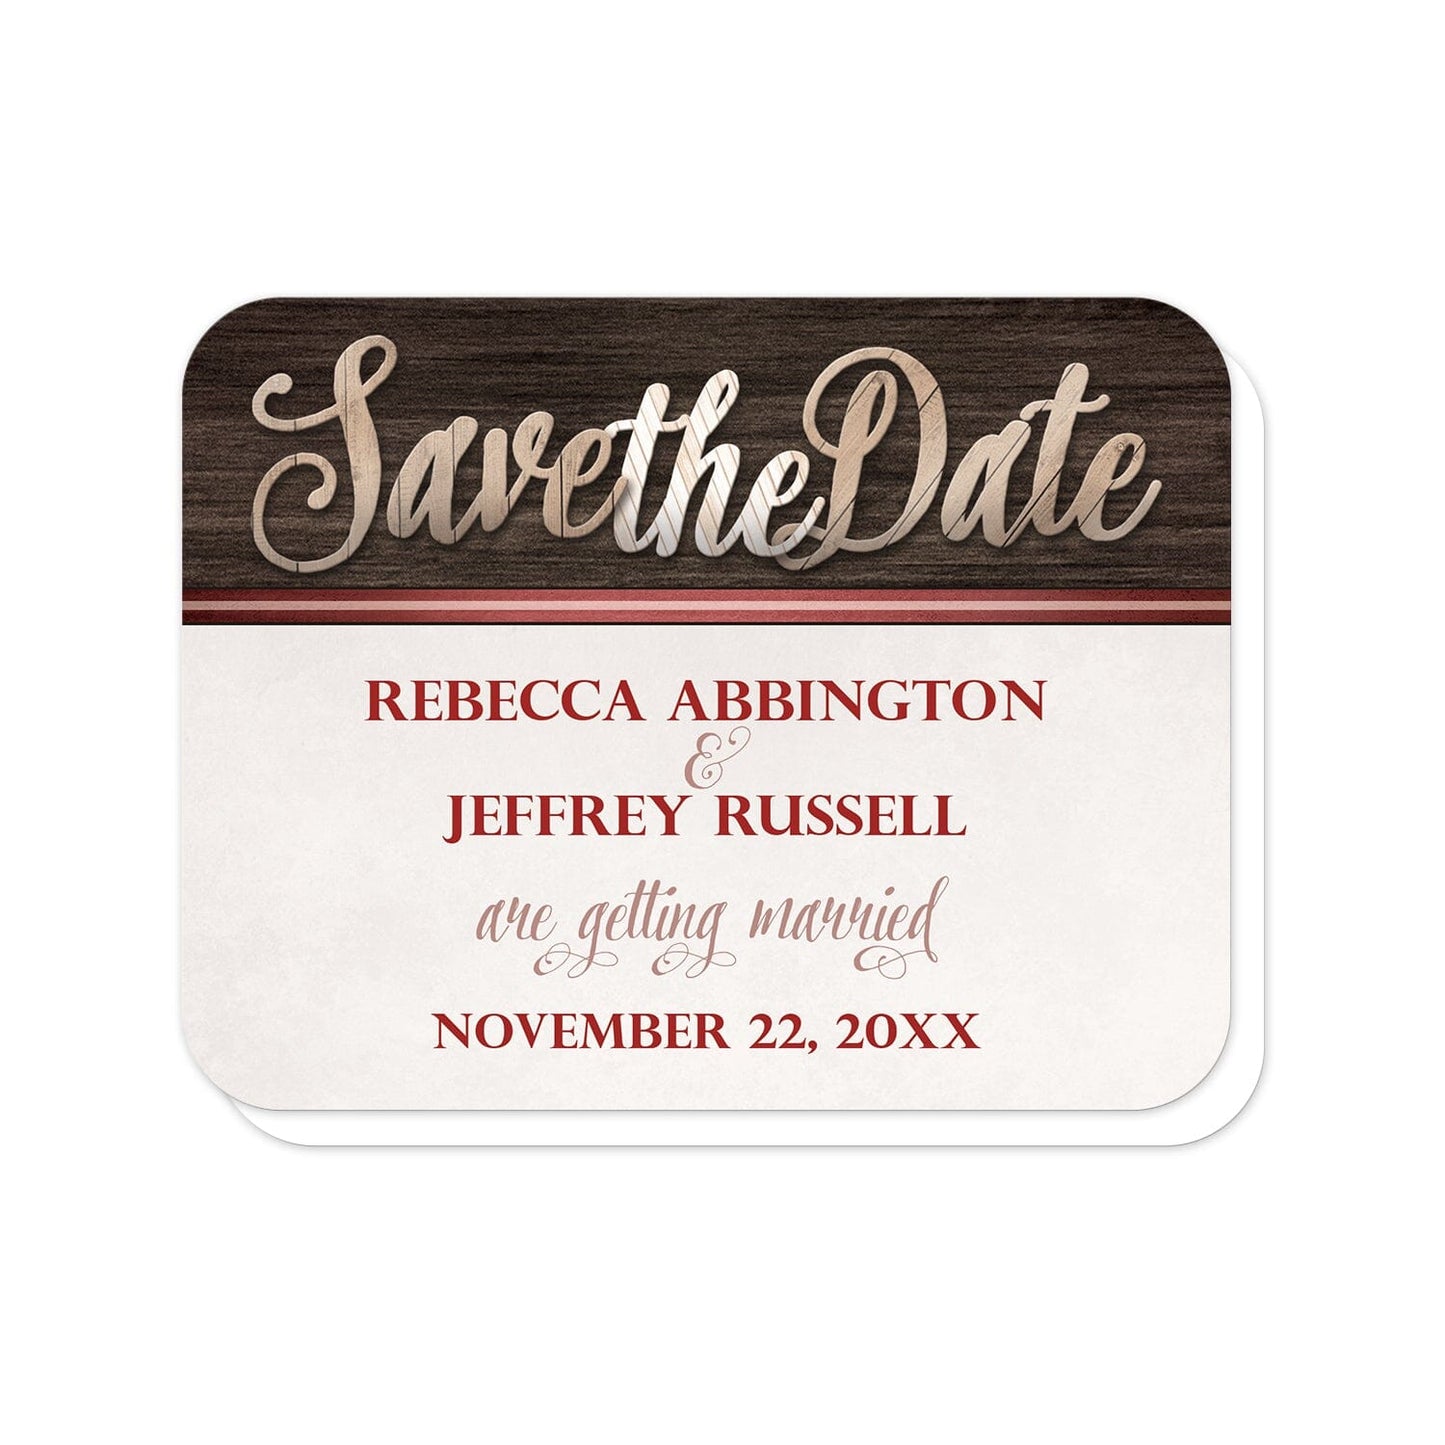 Rustic Wood Lettering with Red Save the Date Cards (with rounded corners) at Artistically Invited. Rustic wood lettering with red save the date cards designed with "Save the Date" in a wooden letters illustration over a dark wood background along the top. Your personalized wedding date details are custom printed in red and light brown over a beige background below the wooden letter illustration. 